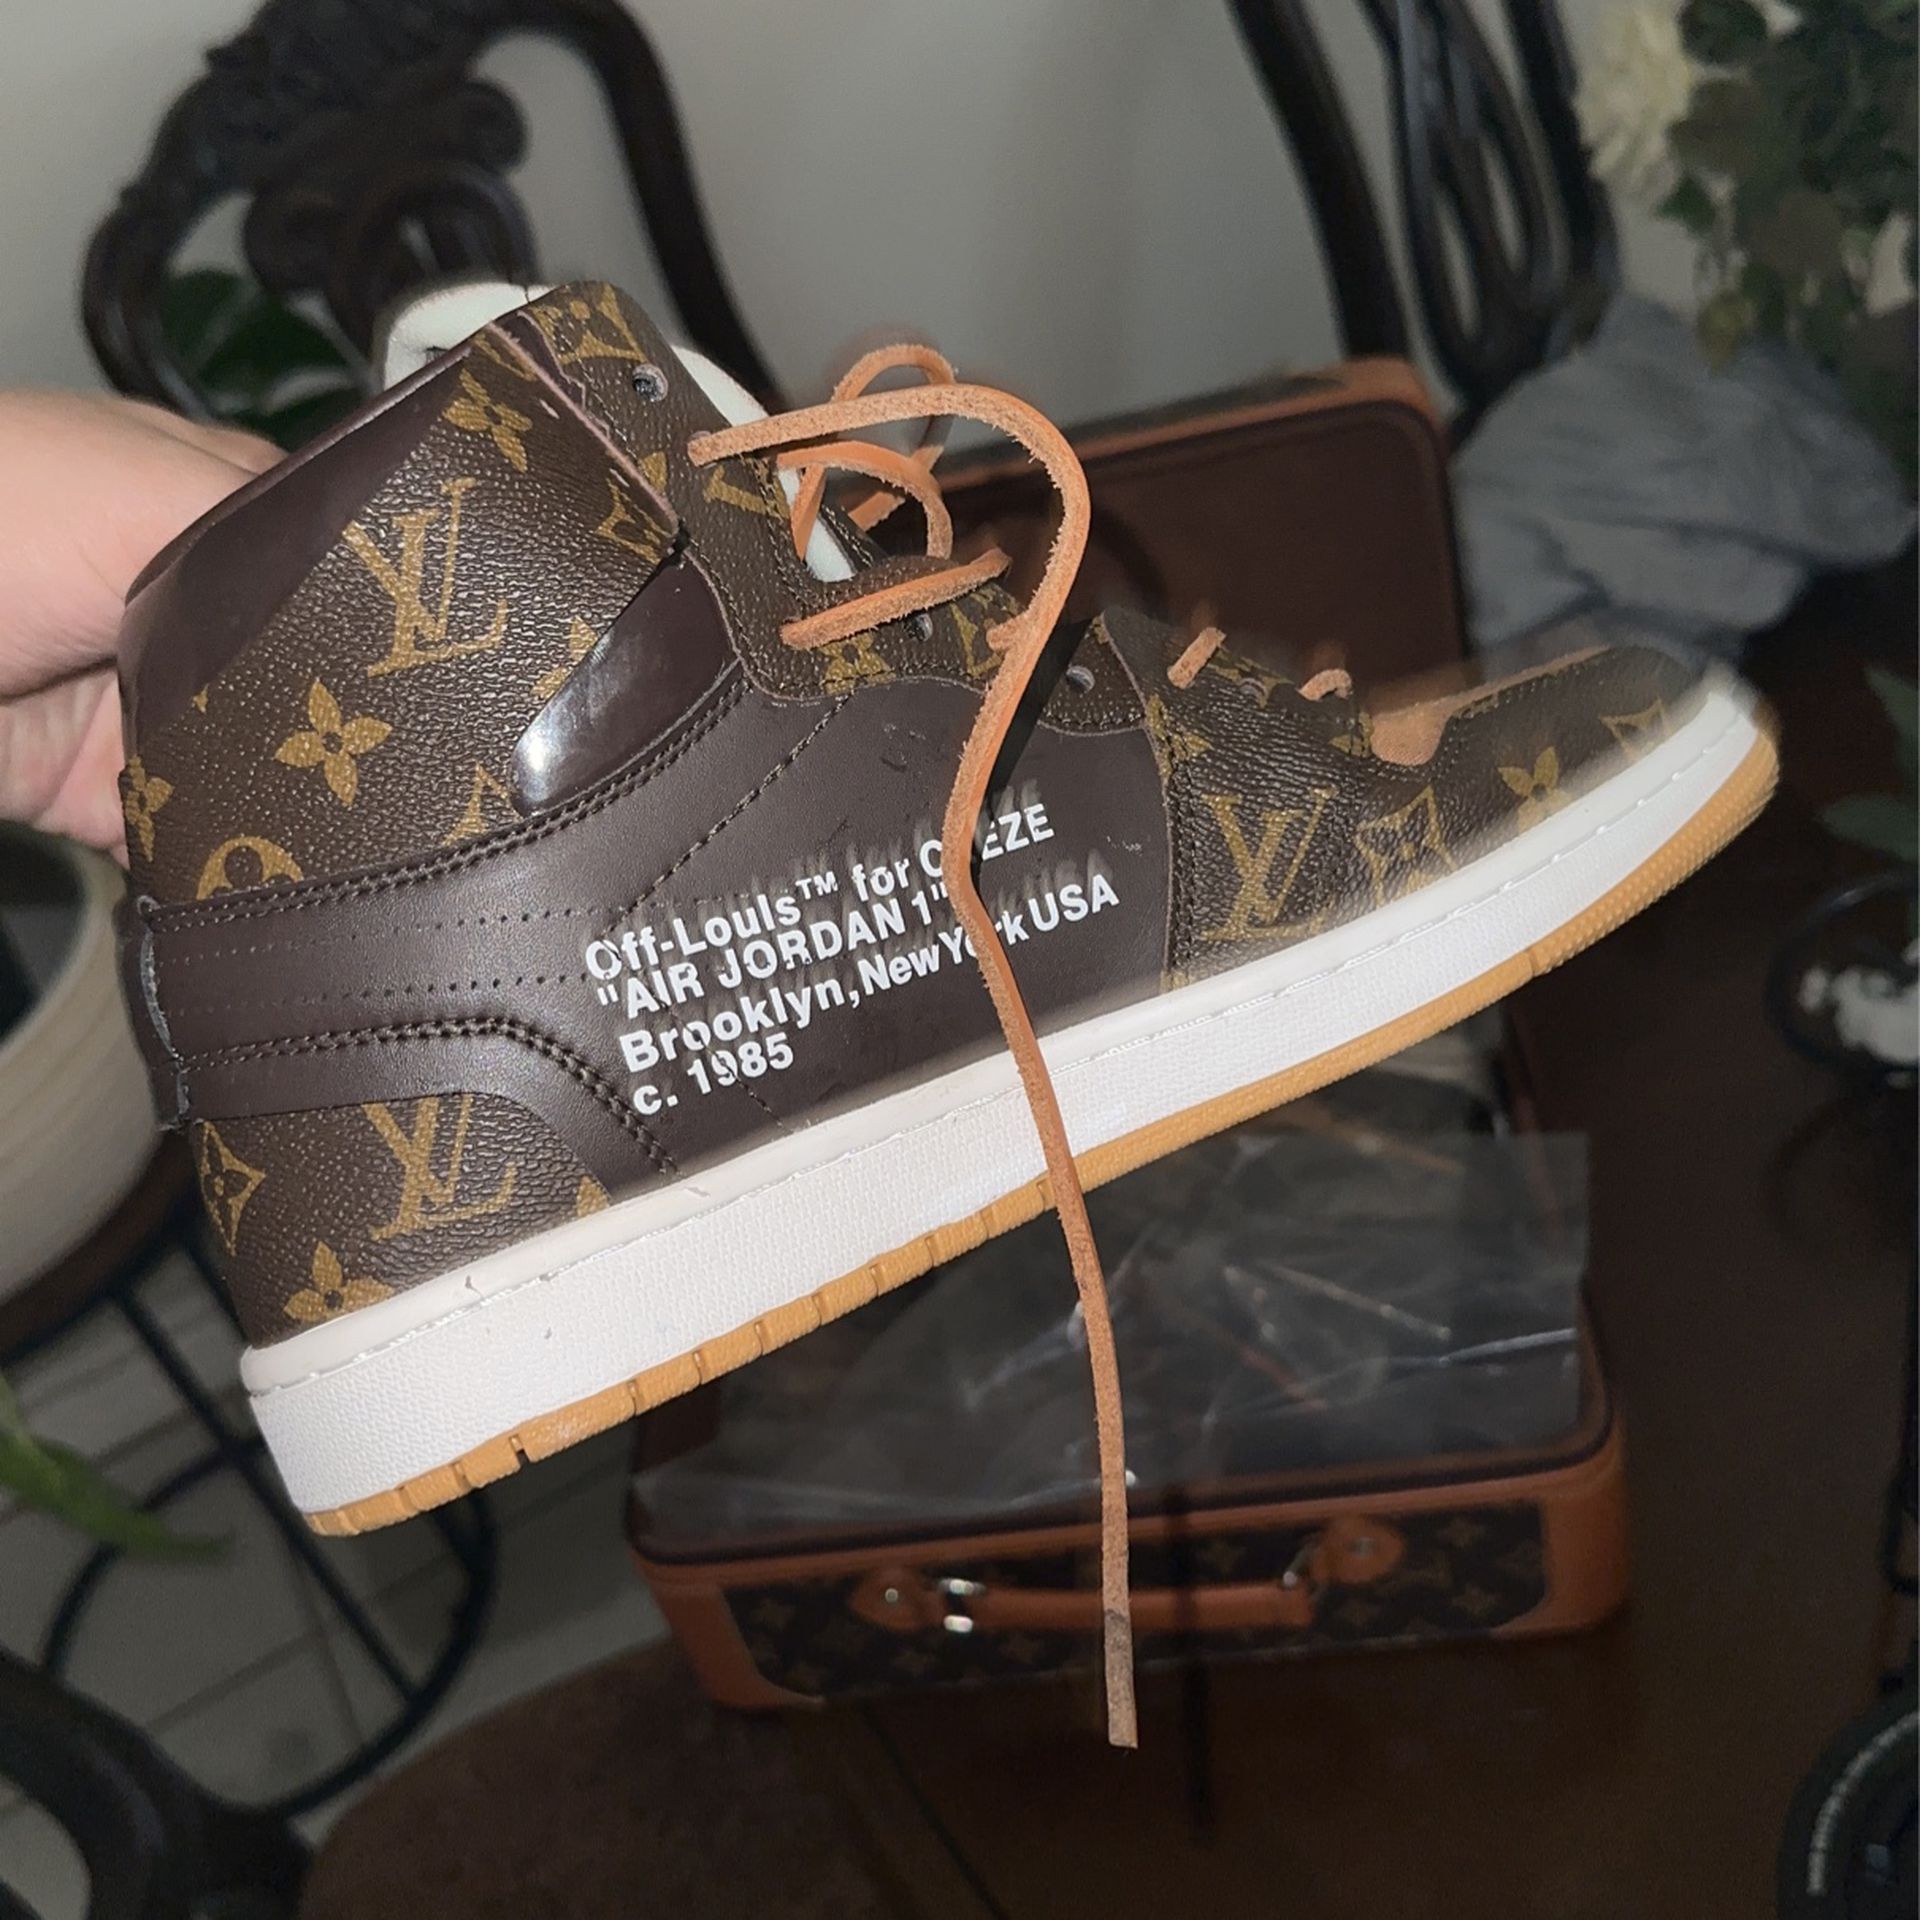 LOUIS VUITTON X OFF-WHITE X NIKE AIR JORDAN 1 for Sale in Brooklyn, NY -  OfferUp